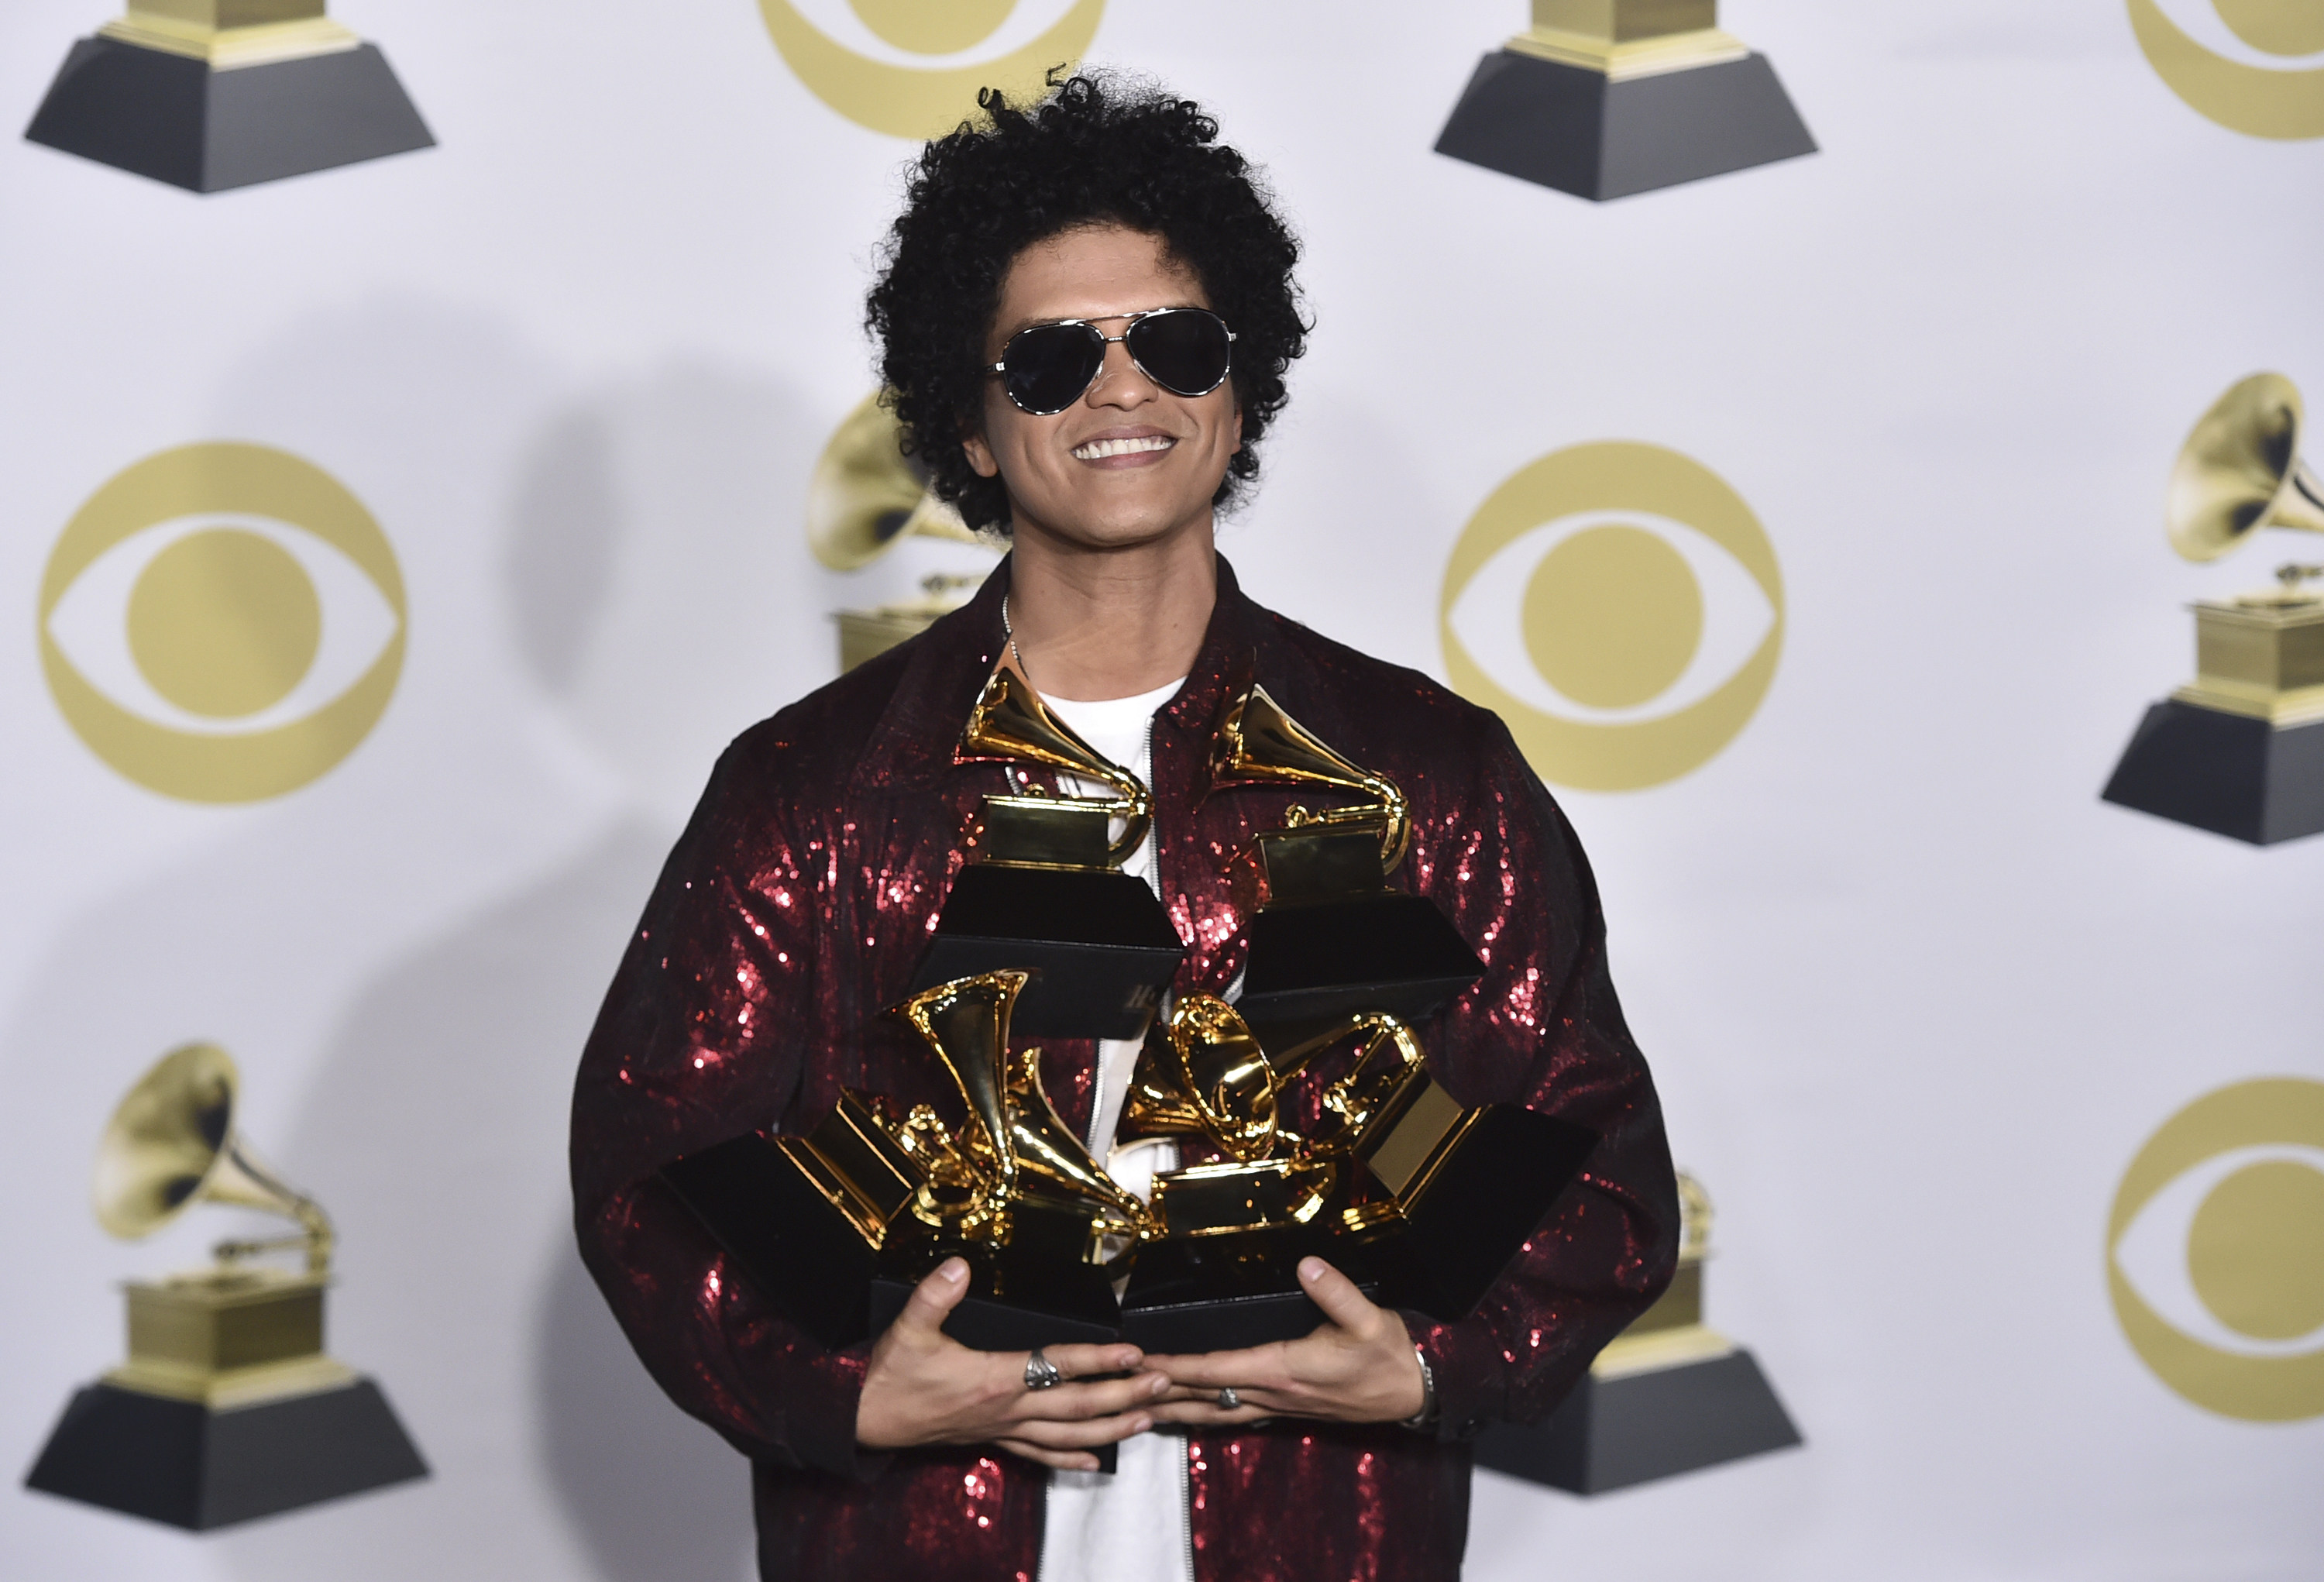 Singer Bruno Mars with his Grammy awards in 2018. Photo: AP